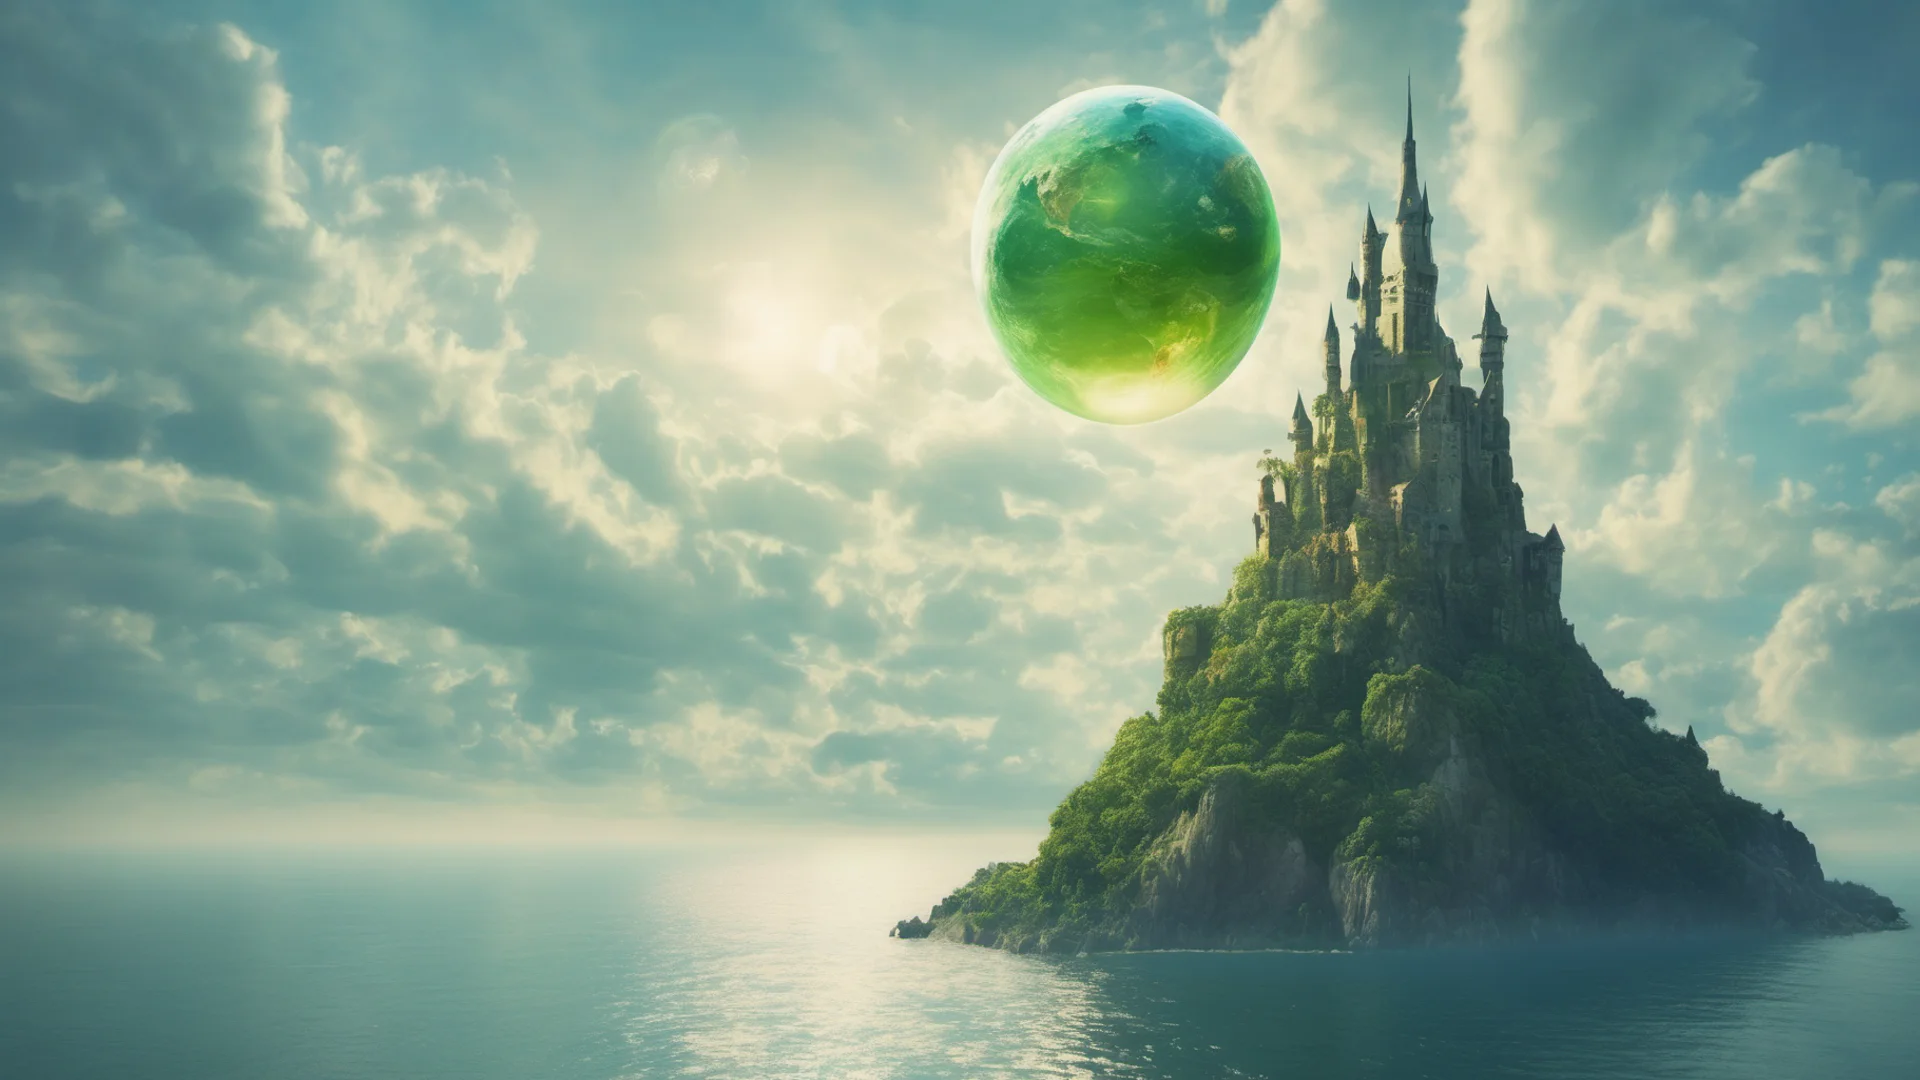 floating castle in sky one creature flying large ocean%2C earthlike green blue circle planet rising in sky%2C amazing cinematic realistic fantasy confident engaging wow artstation art 3 wide